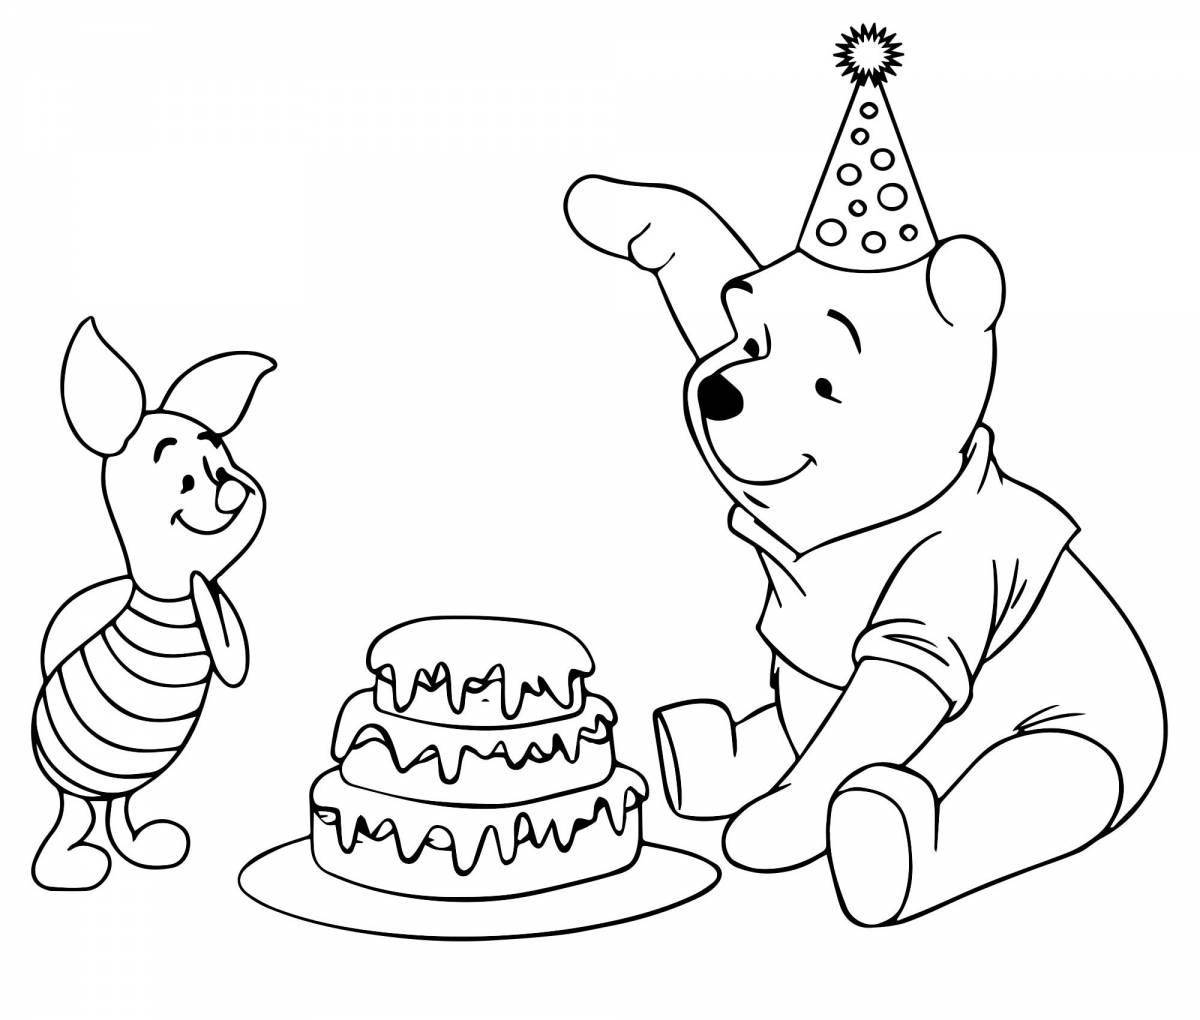 Happy birthday card for kids #7